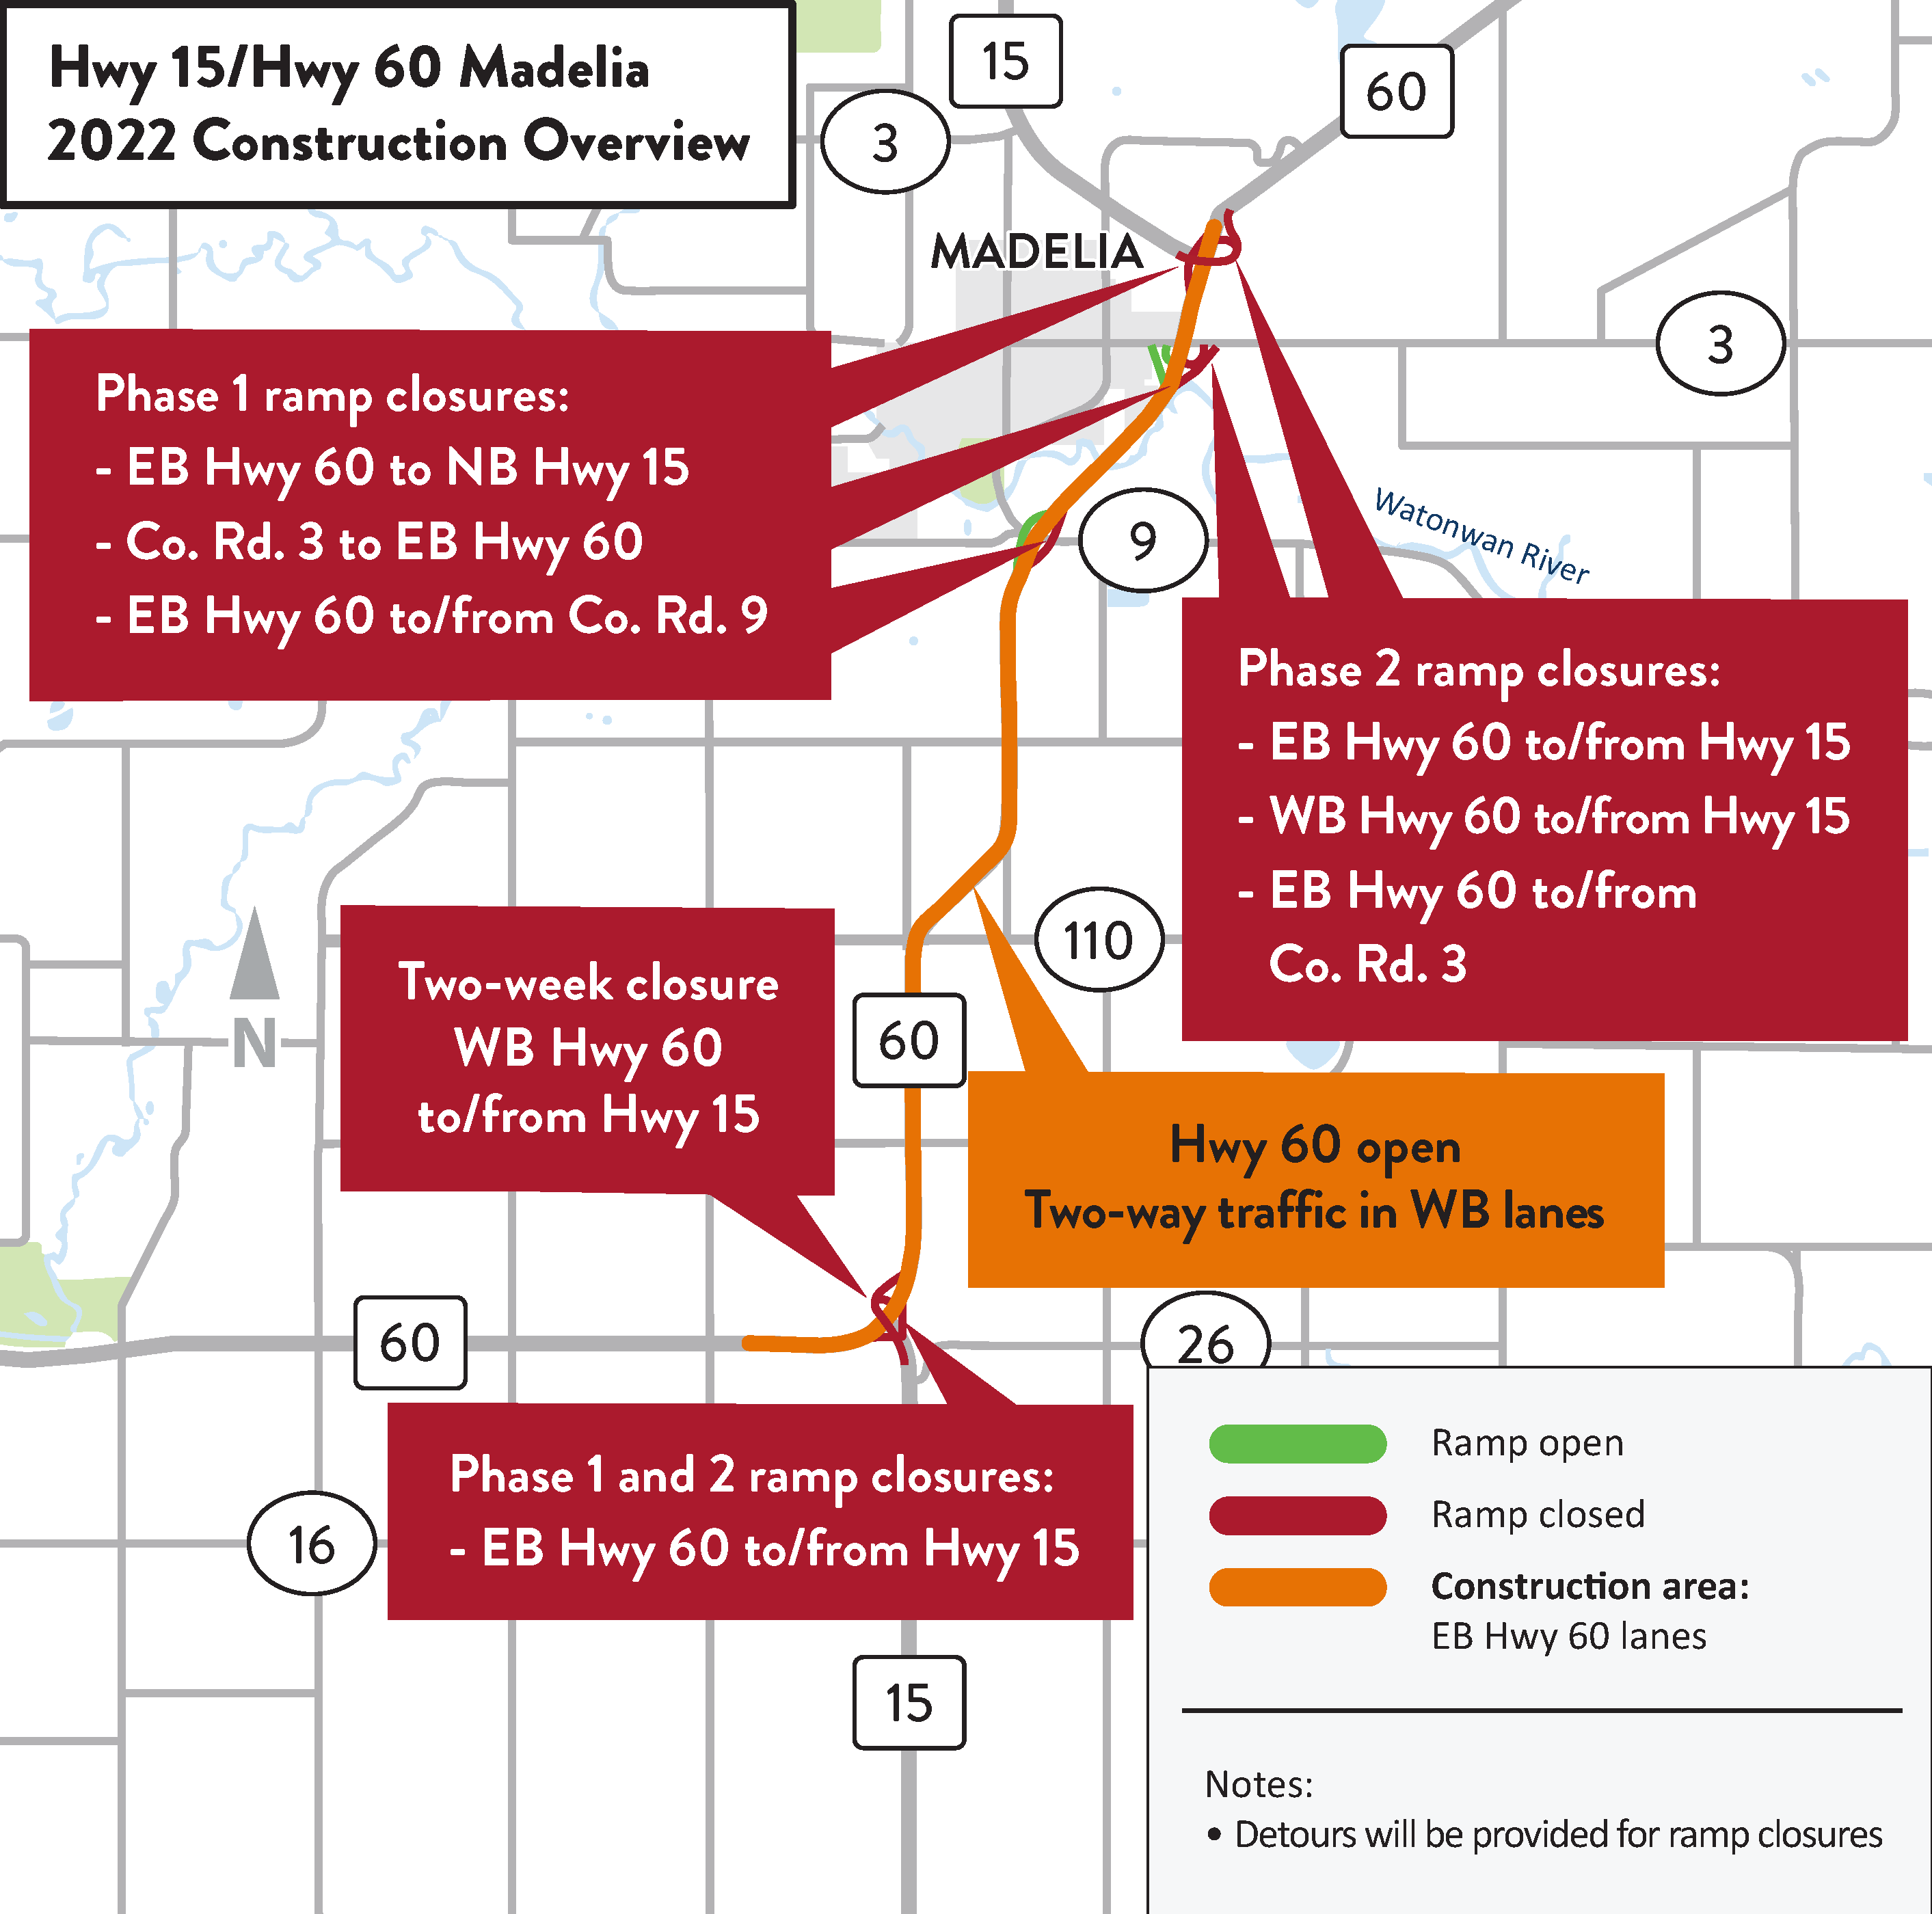 Hwy 15/Hwy 60 2022 construction overview